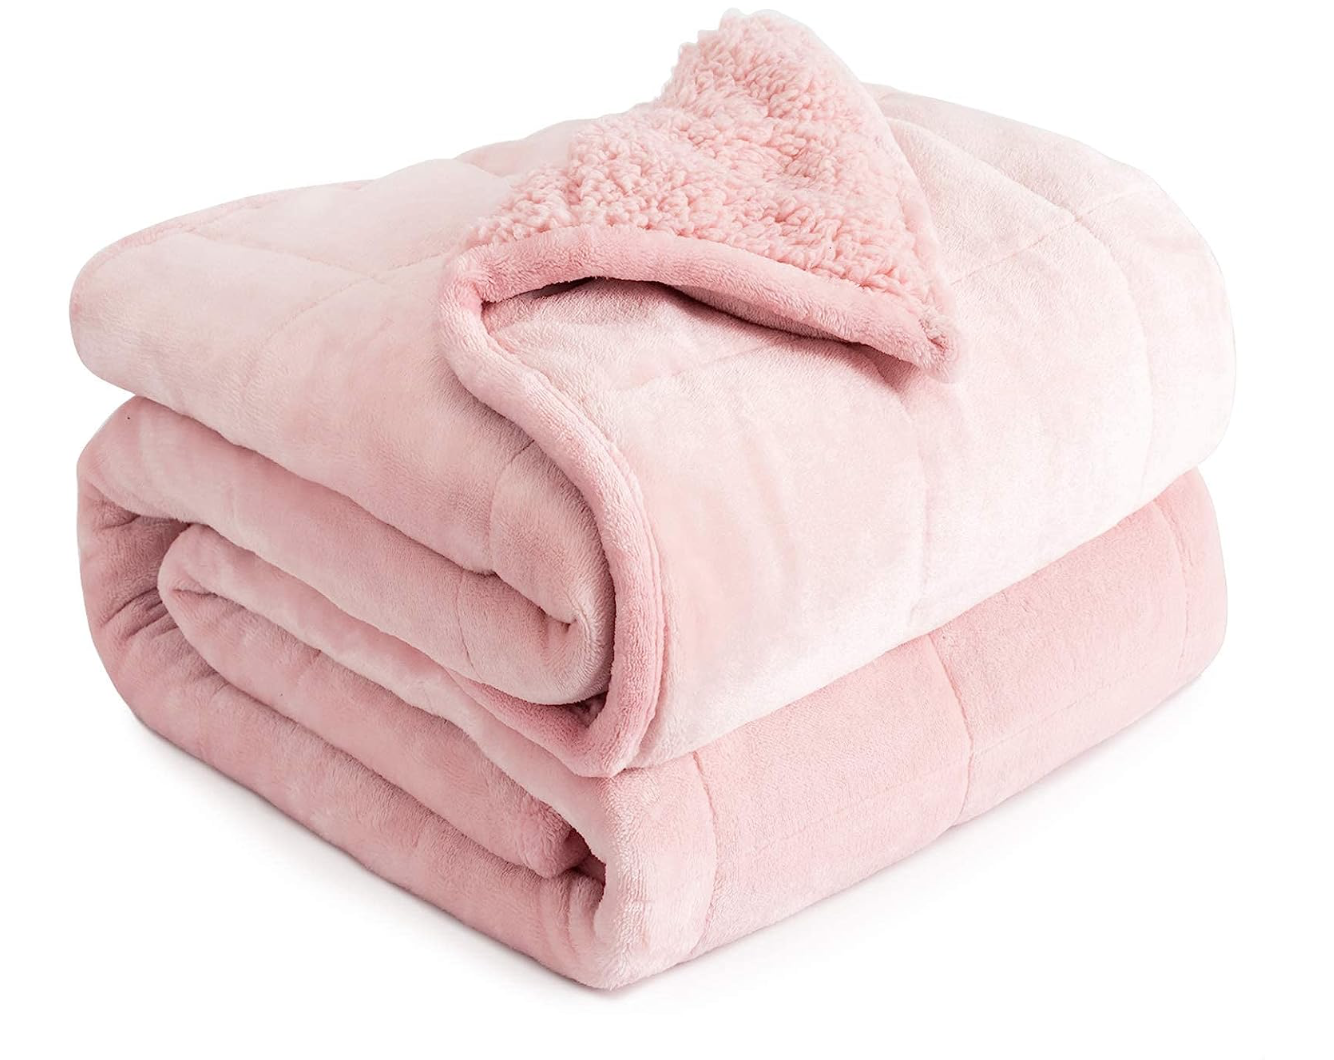 Queen Size 15lbs, Weighted Blanket for Adults